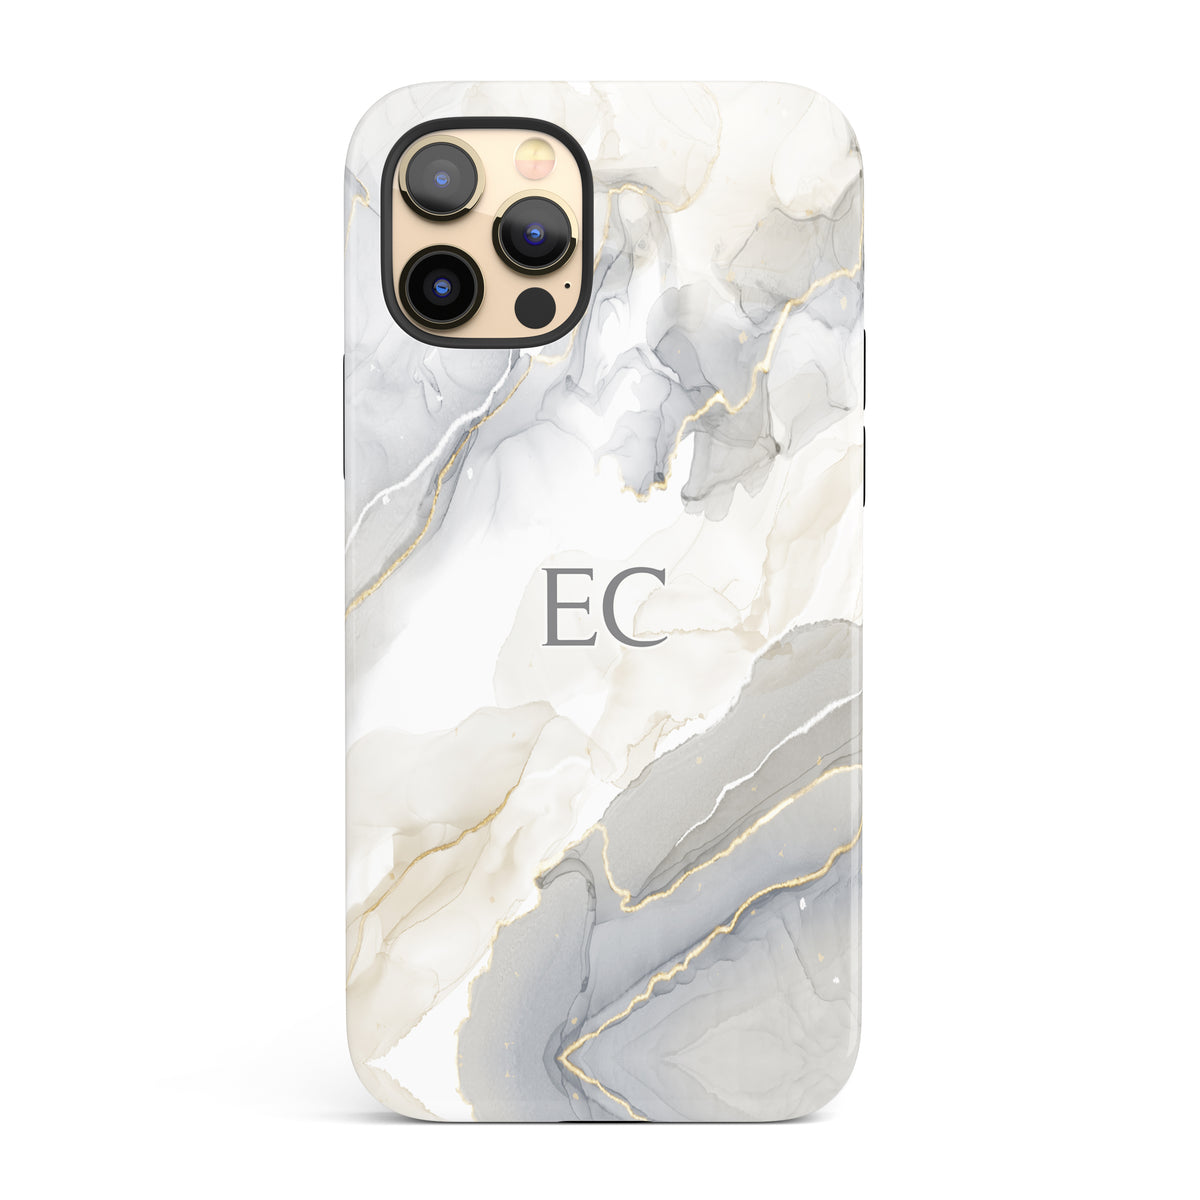 The Personalised Gold Marble Case